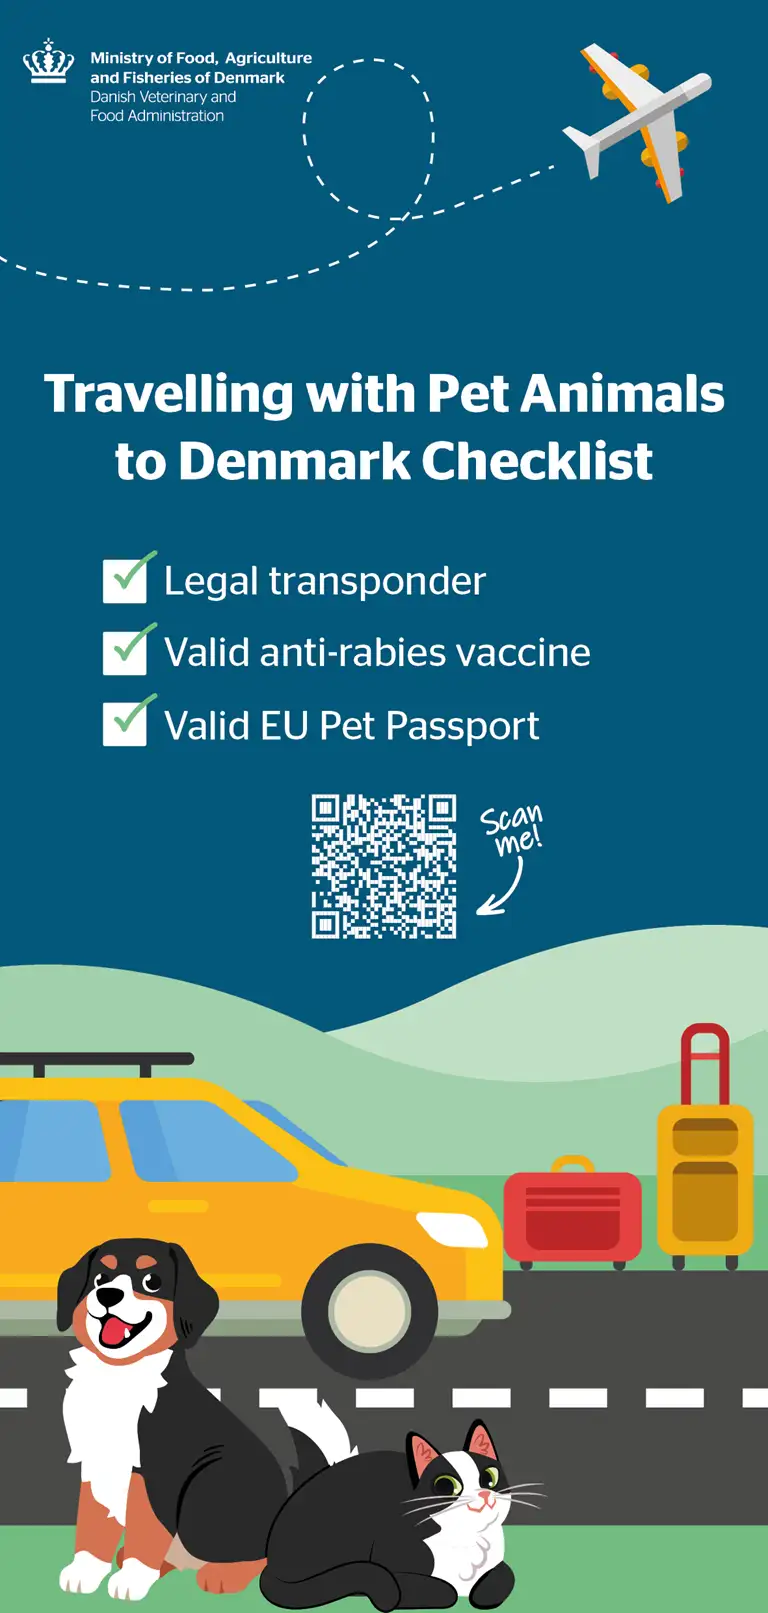 Checklist for traveling to Denmark with pets. Remember: Legal transponder. Valid anti-rabies vaccine. Valid EU pet passport